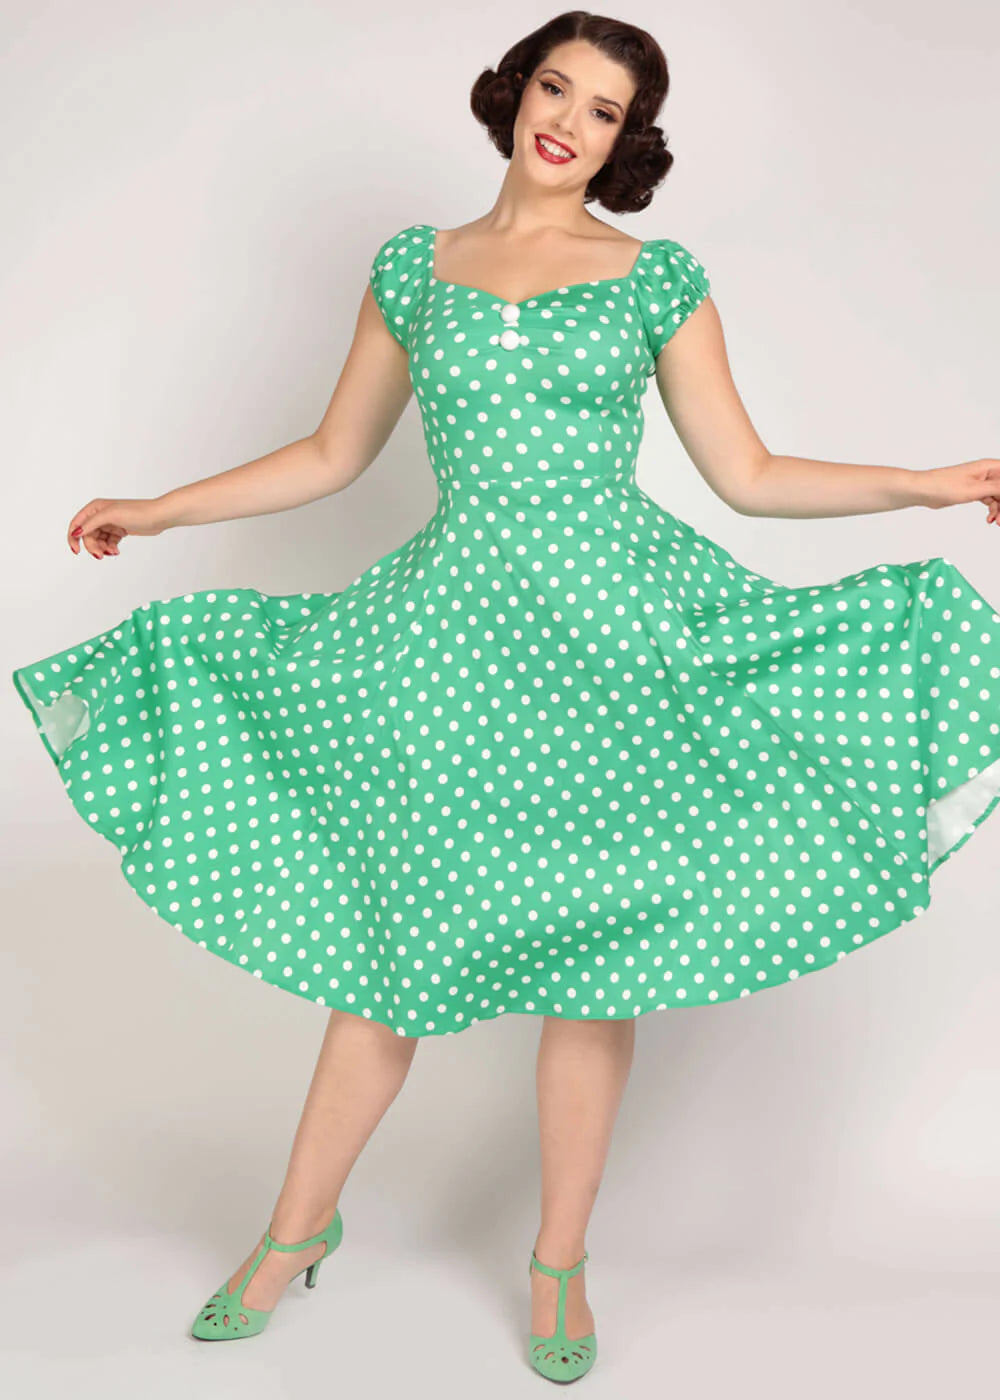 Dolores Doll Green and White Polka Dot Dress by Collectif – Isabel's Retro  & Vintage Clothing